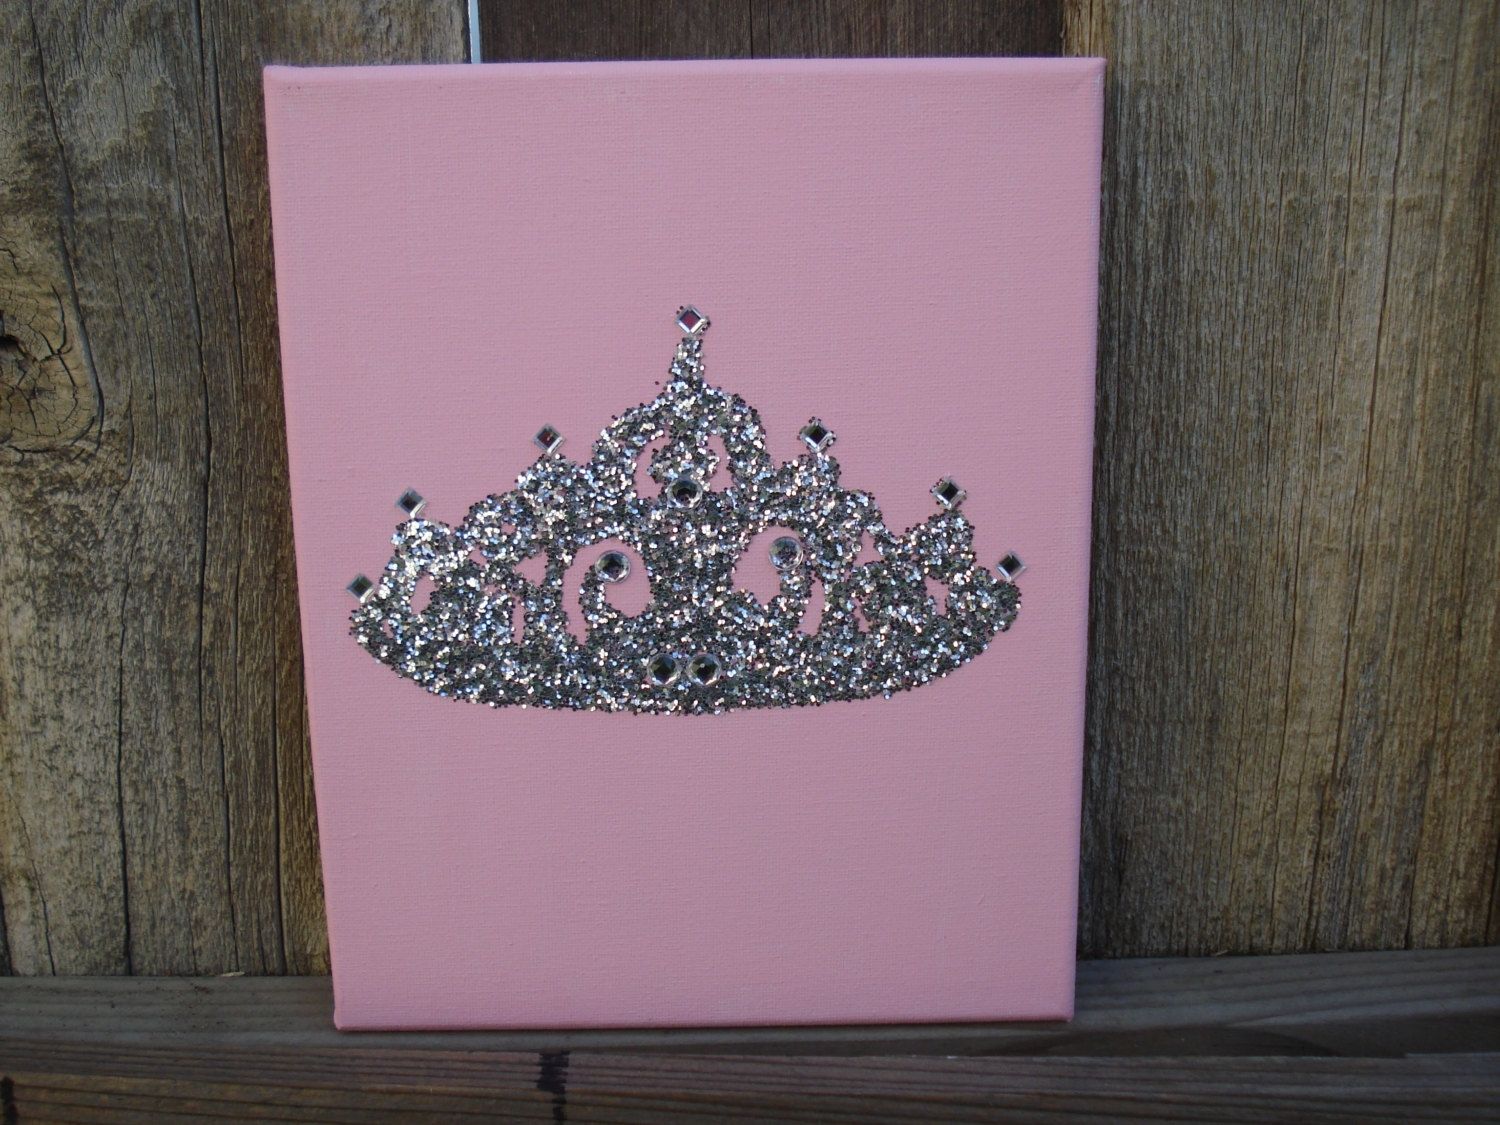 Pink Glitter Tiara Rhinestone Handmade Canvas Wall Art Painting Inside Most Recently Released Glitter Canvas Wall Art (View 2 of 15)